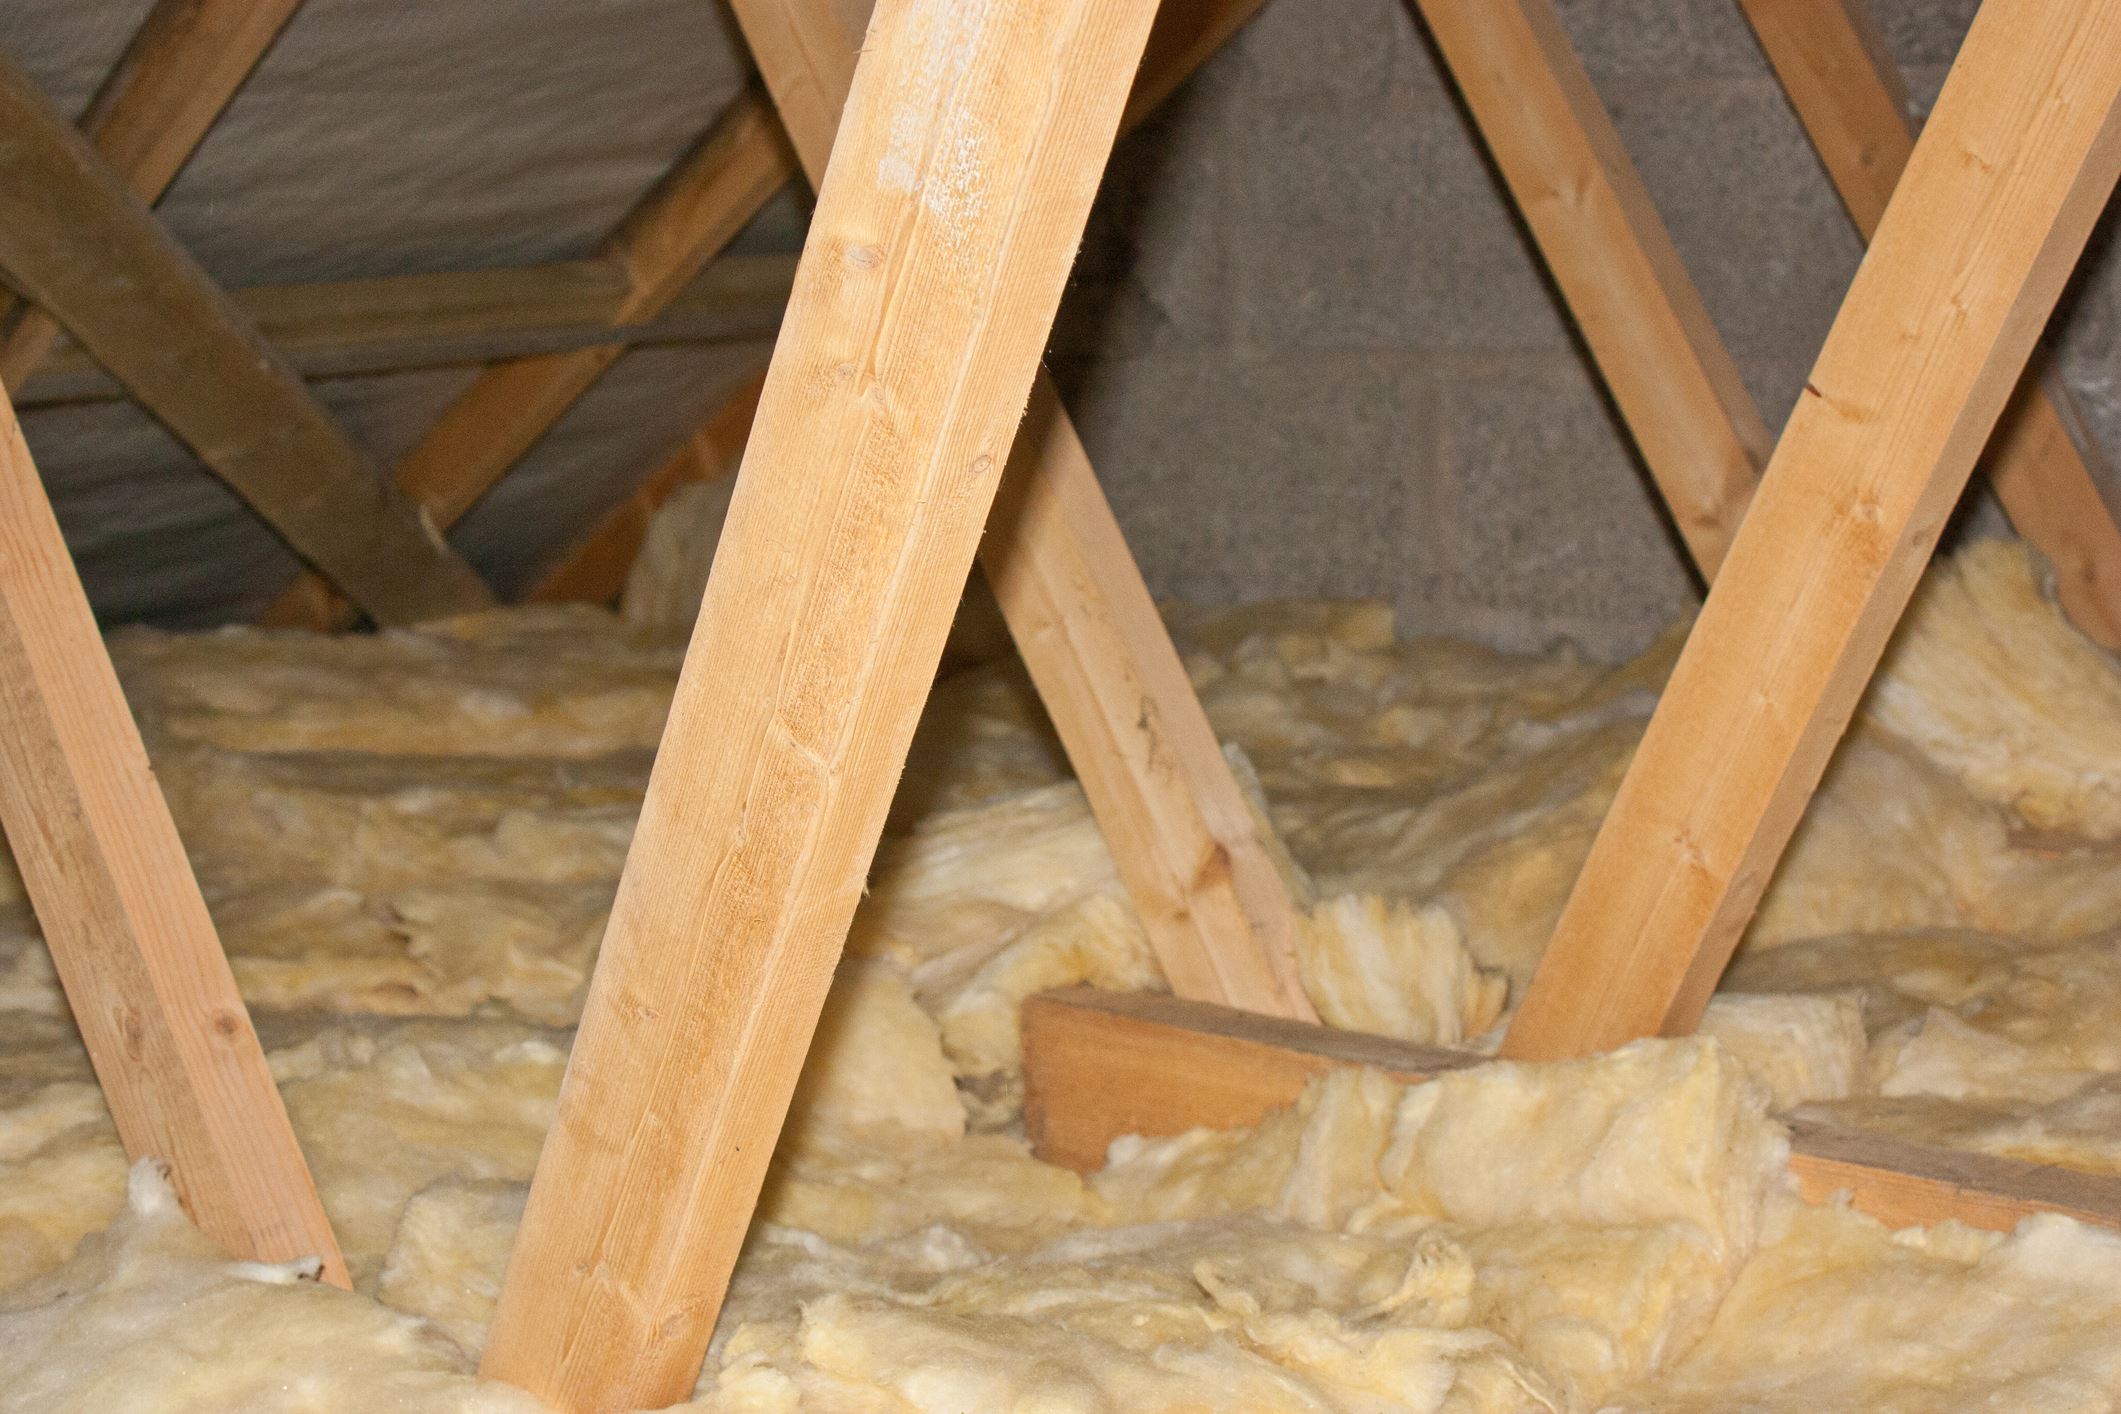 An attic with insulation